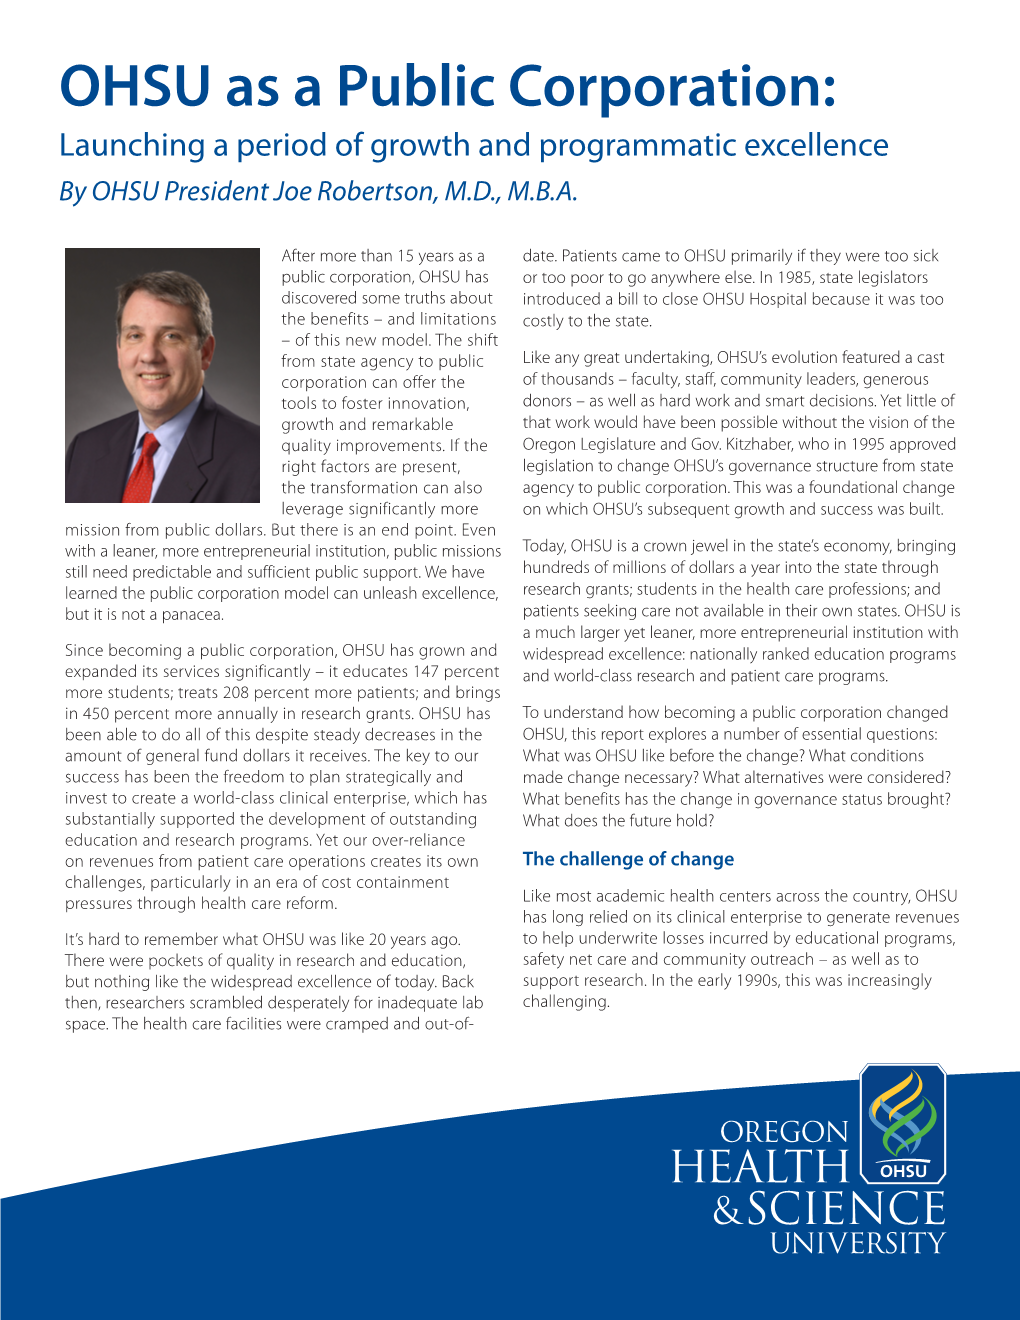 OHSU As a Public Corporation: Launching a Period of Growth and Programmatic Excellence by OHSU President Joe Robertson, M.D., M.B.A